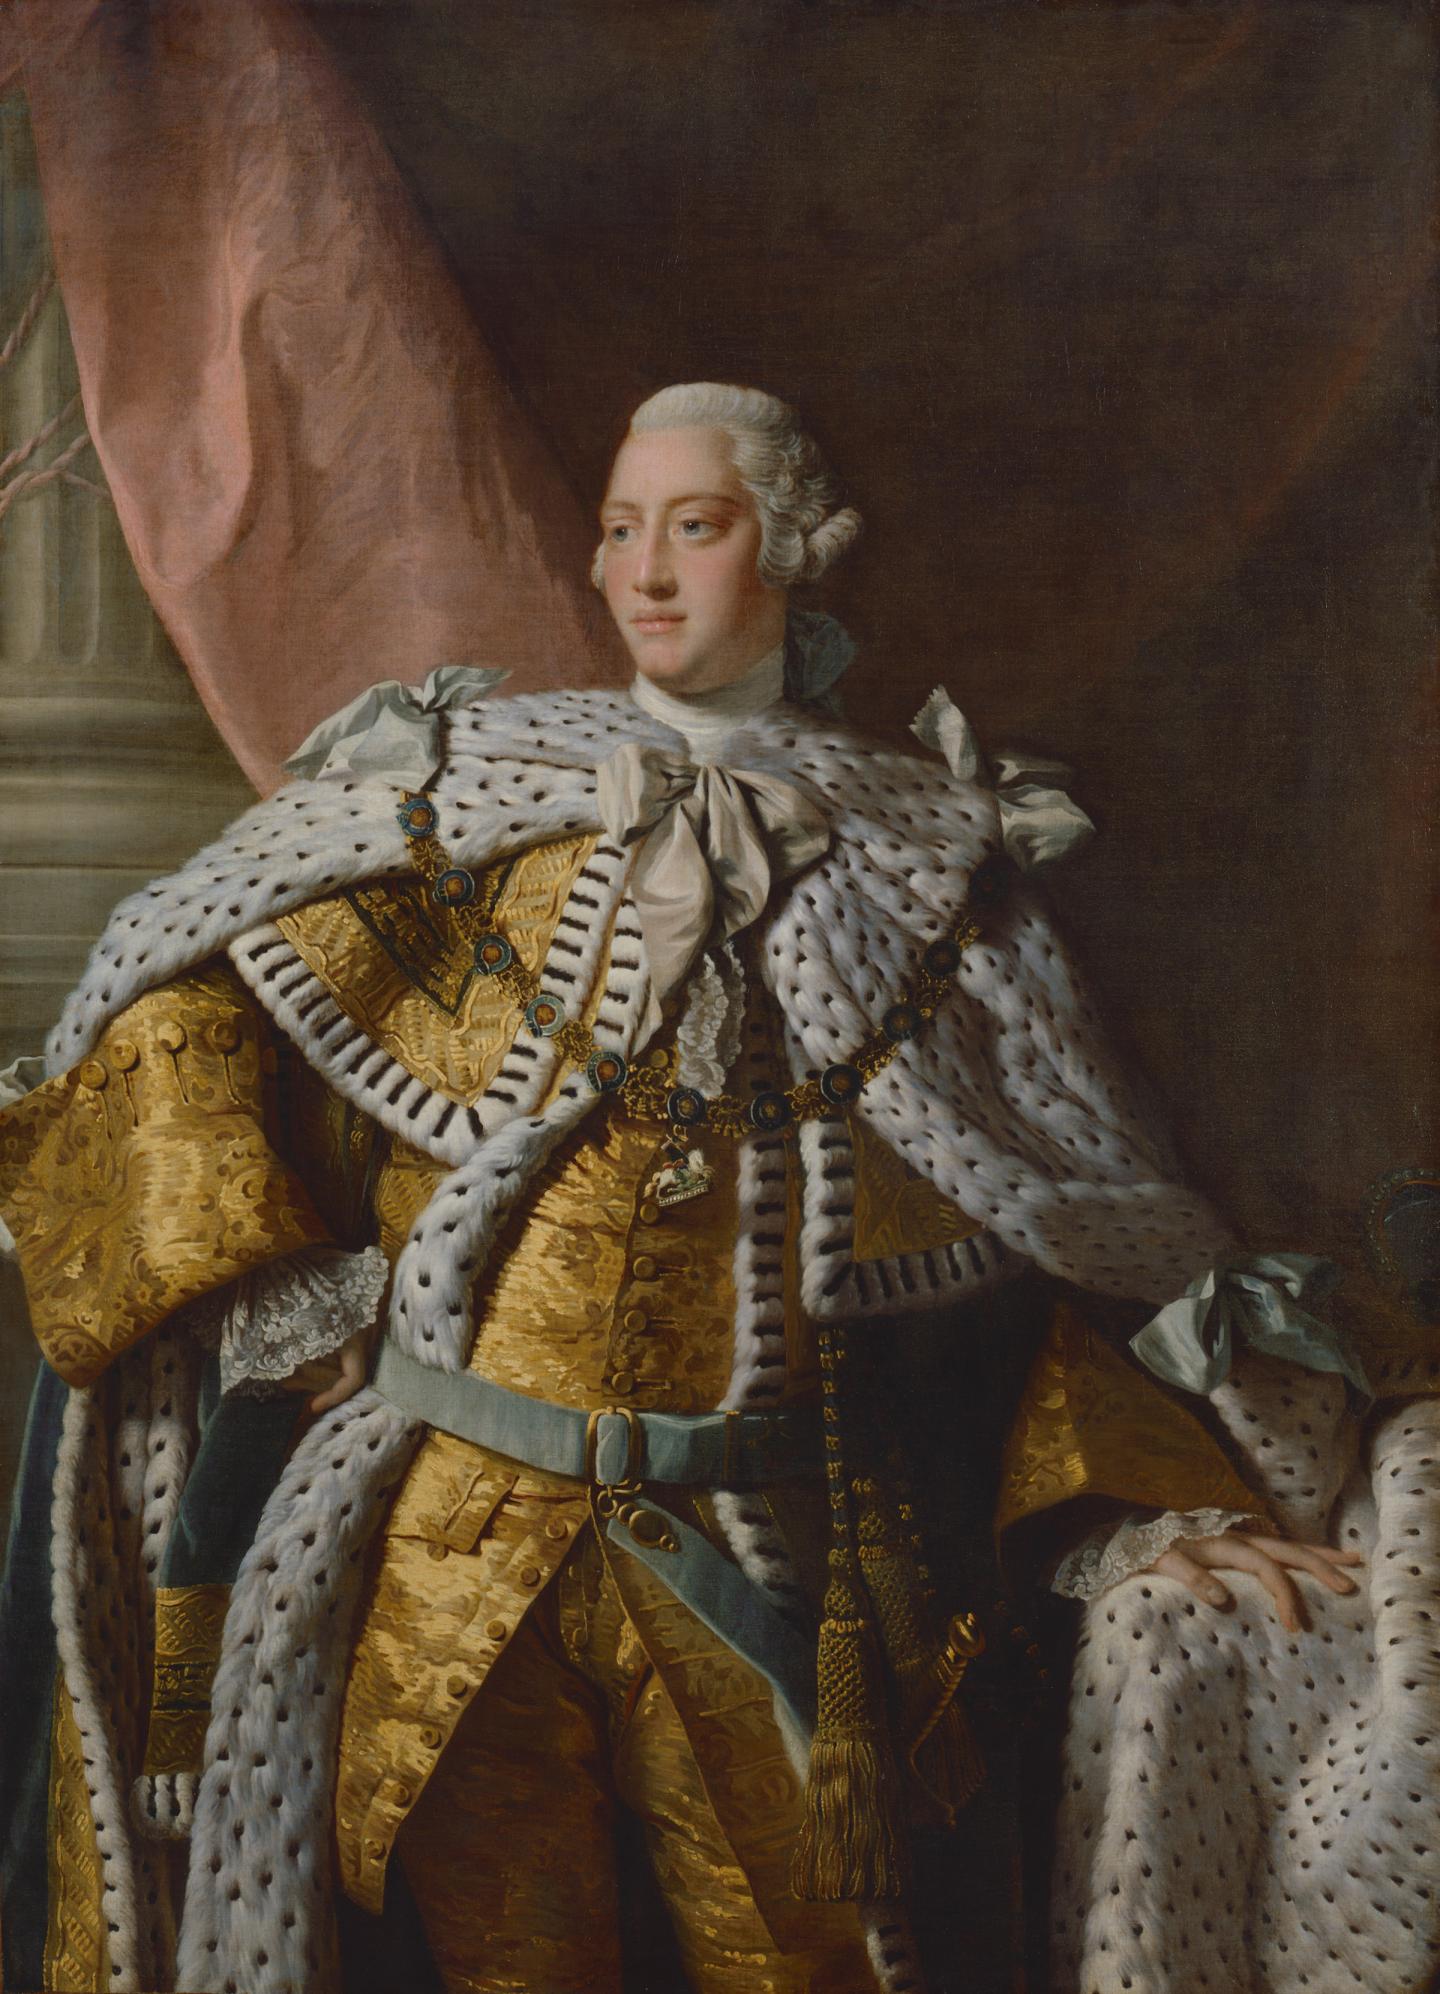 George III stands wearing gold coronation robes